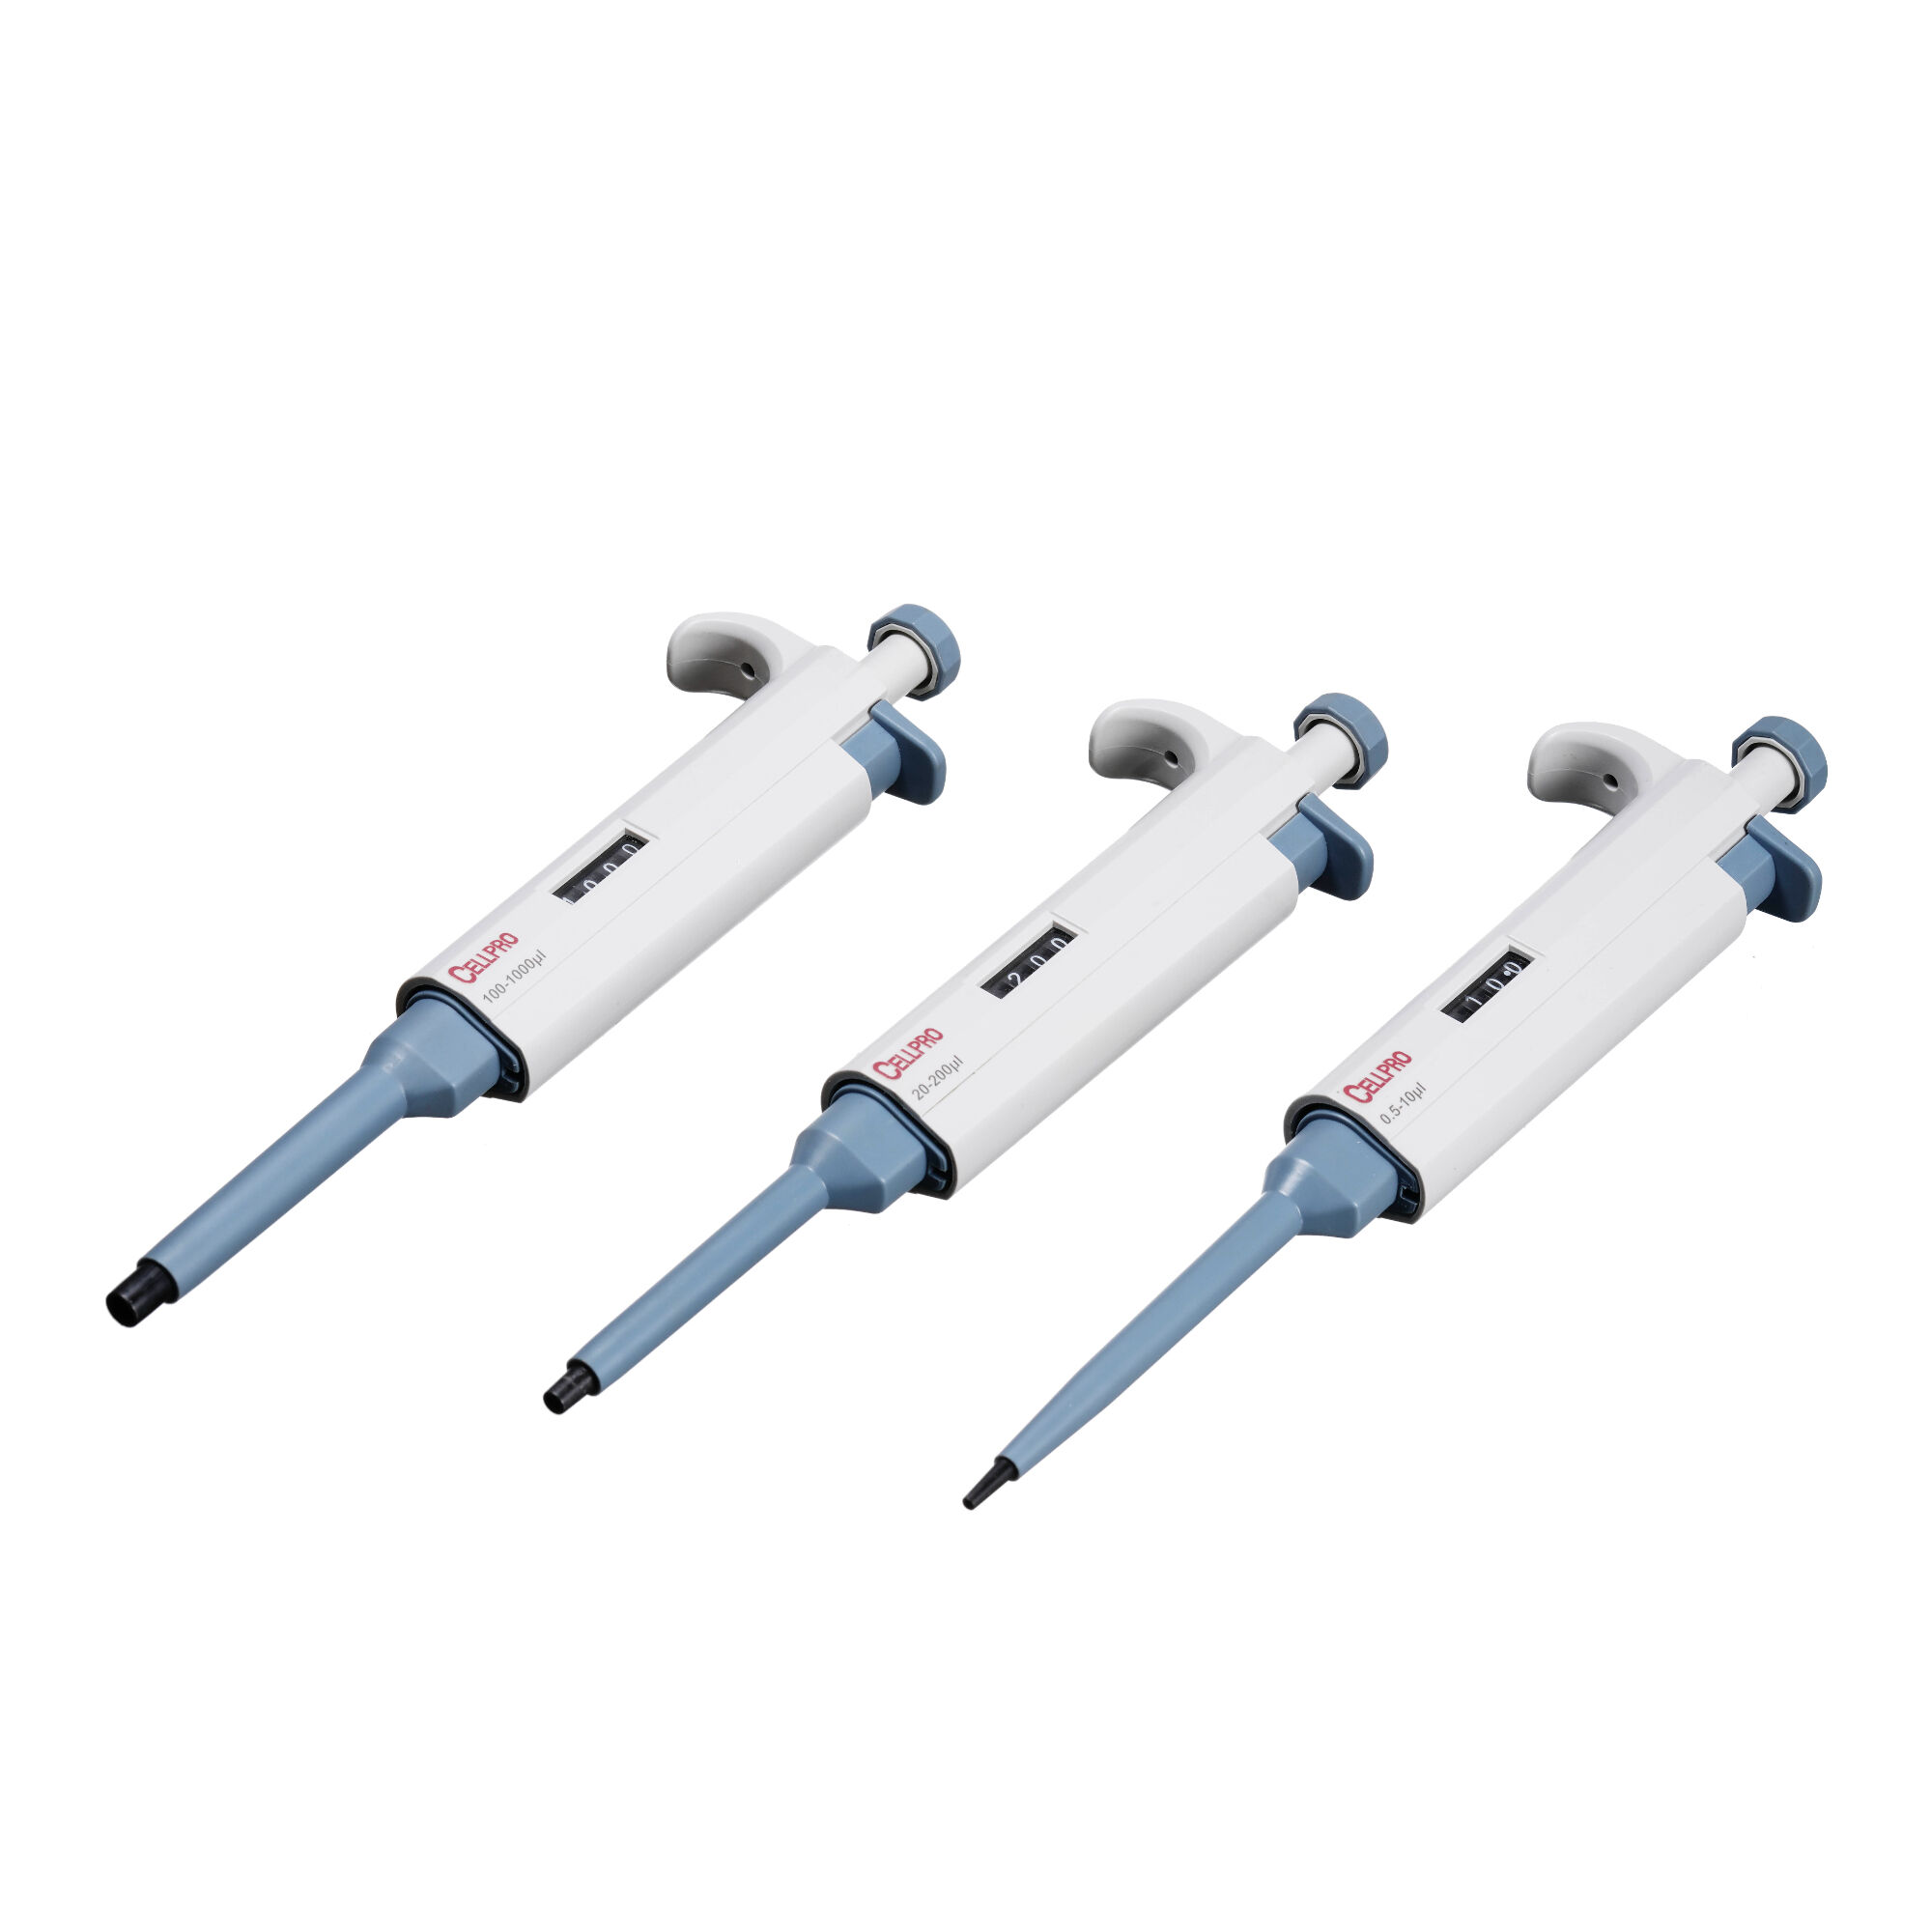 CellProBio Digital Fixed Variable Micro Pipette